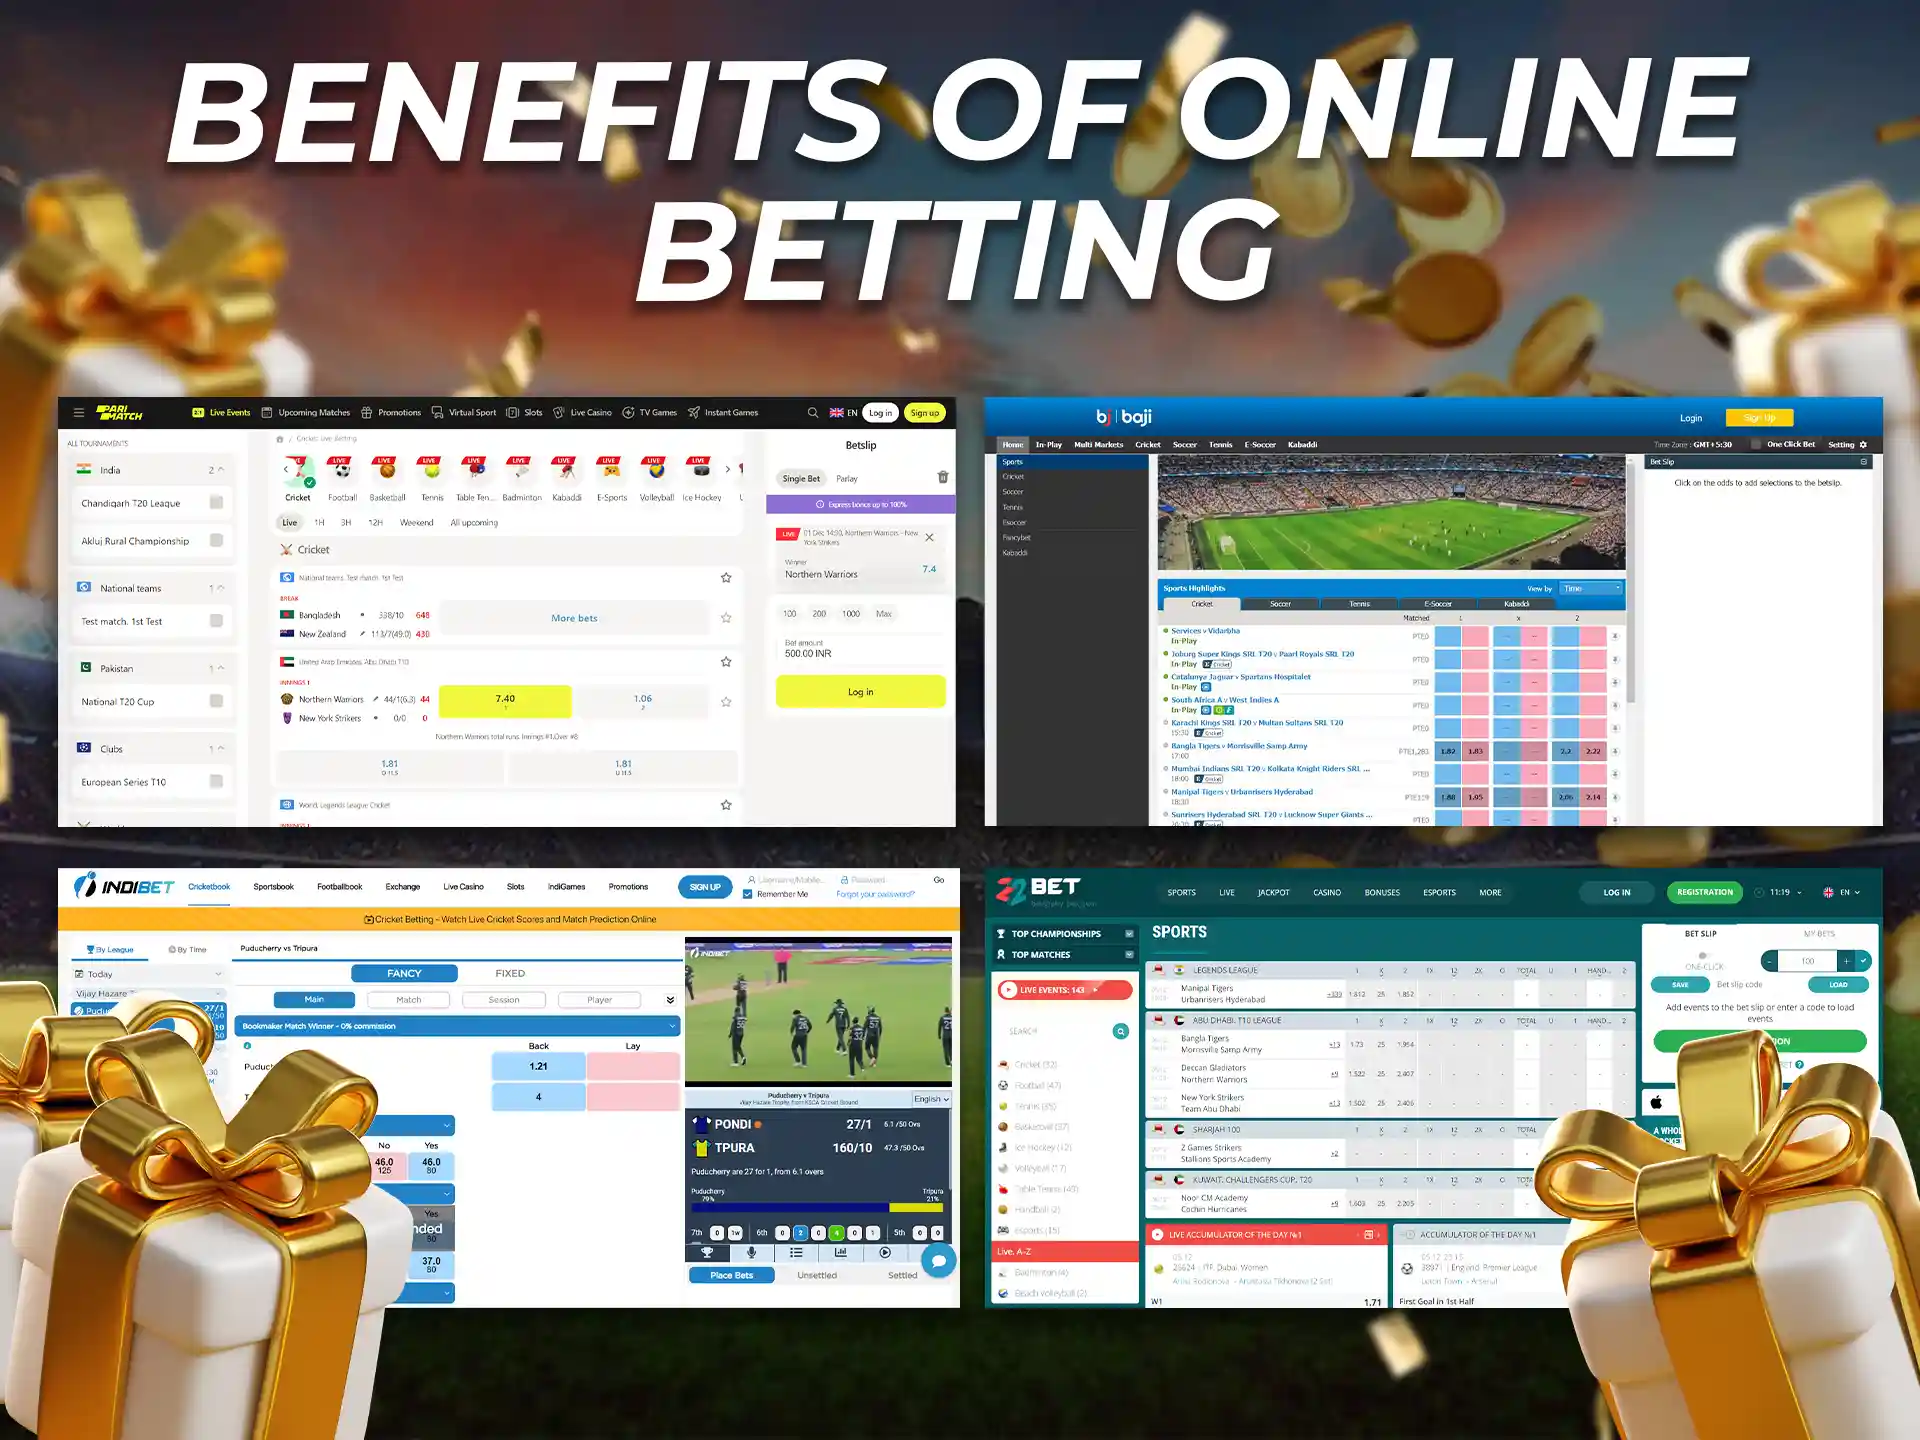 Online betting has a number of advantages.